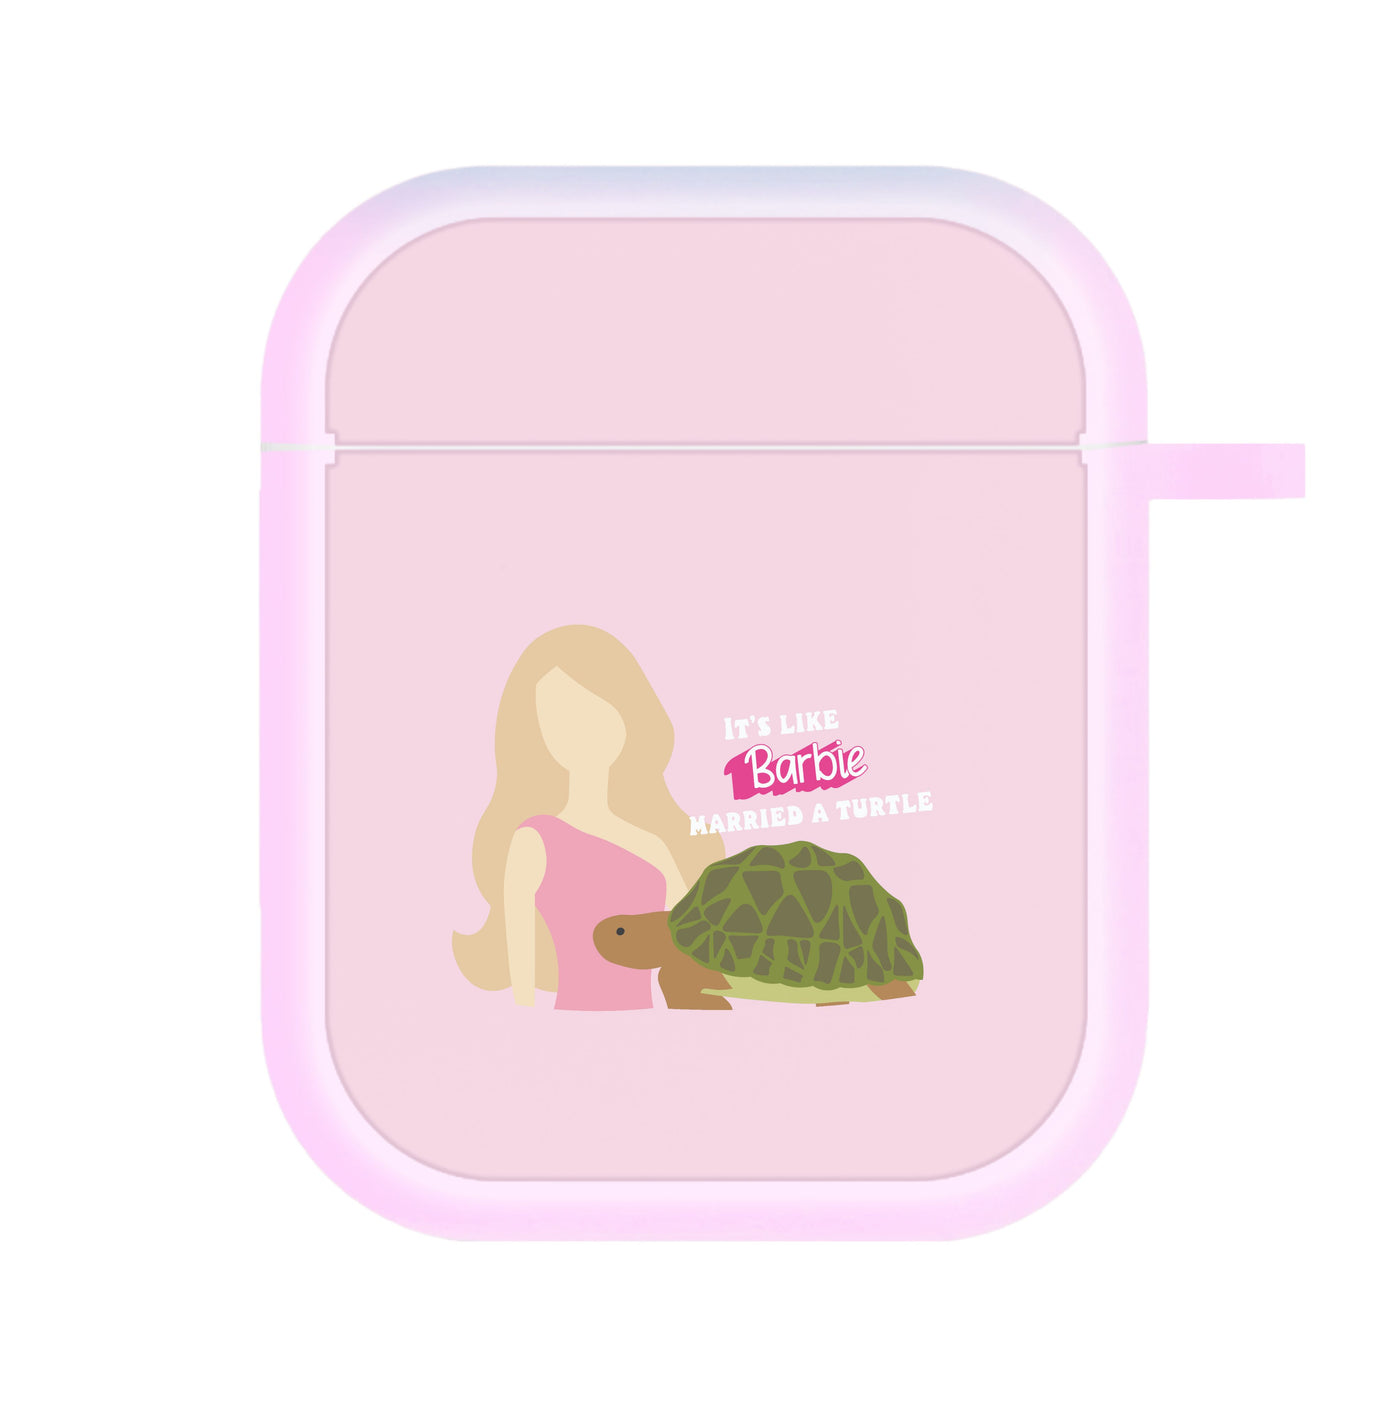 Married A Turtle - Young Sheldon AirPods Case